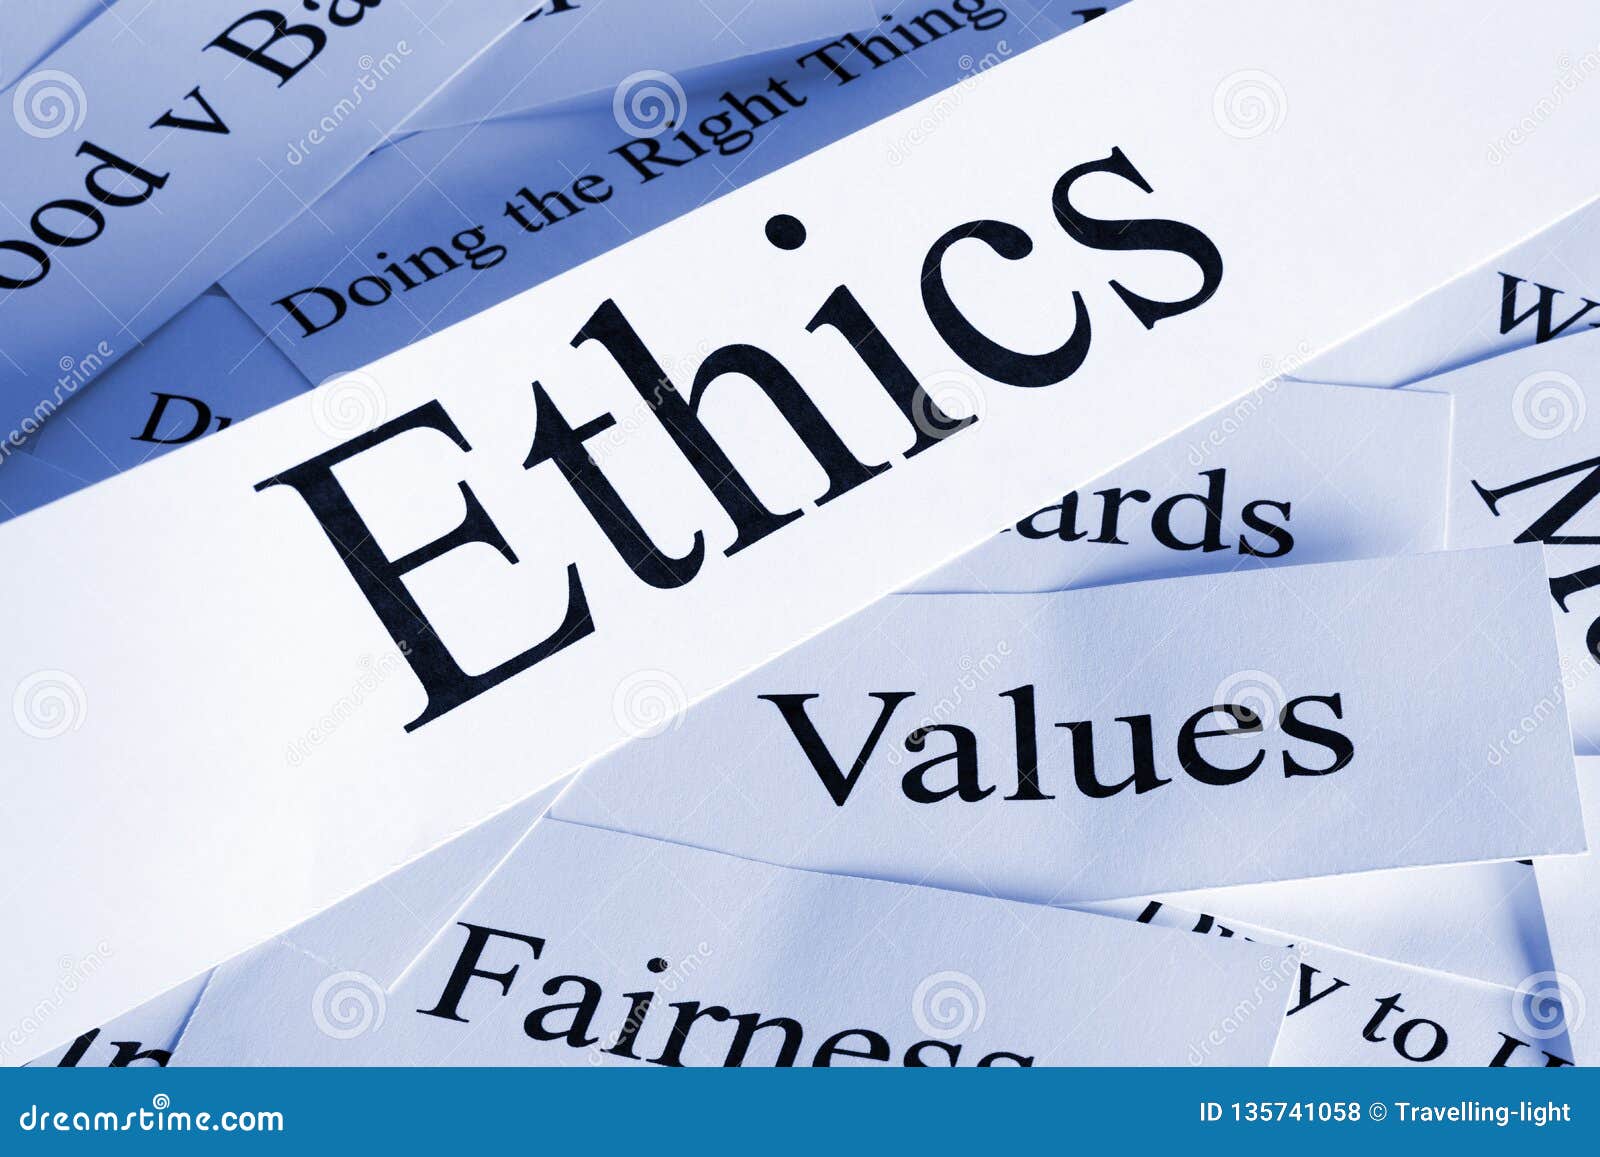 ethics concept in words